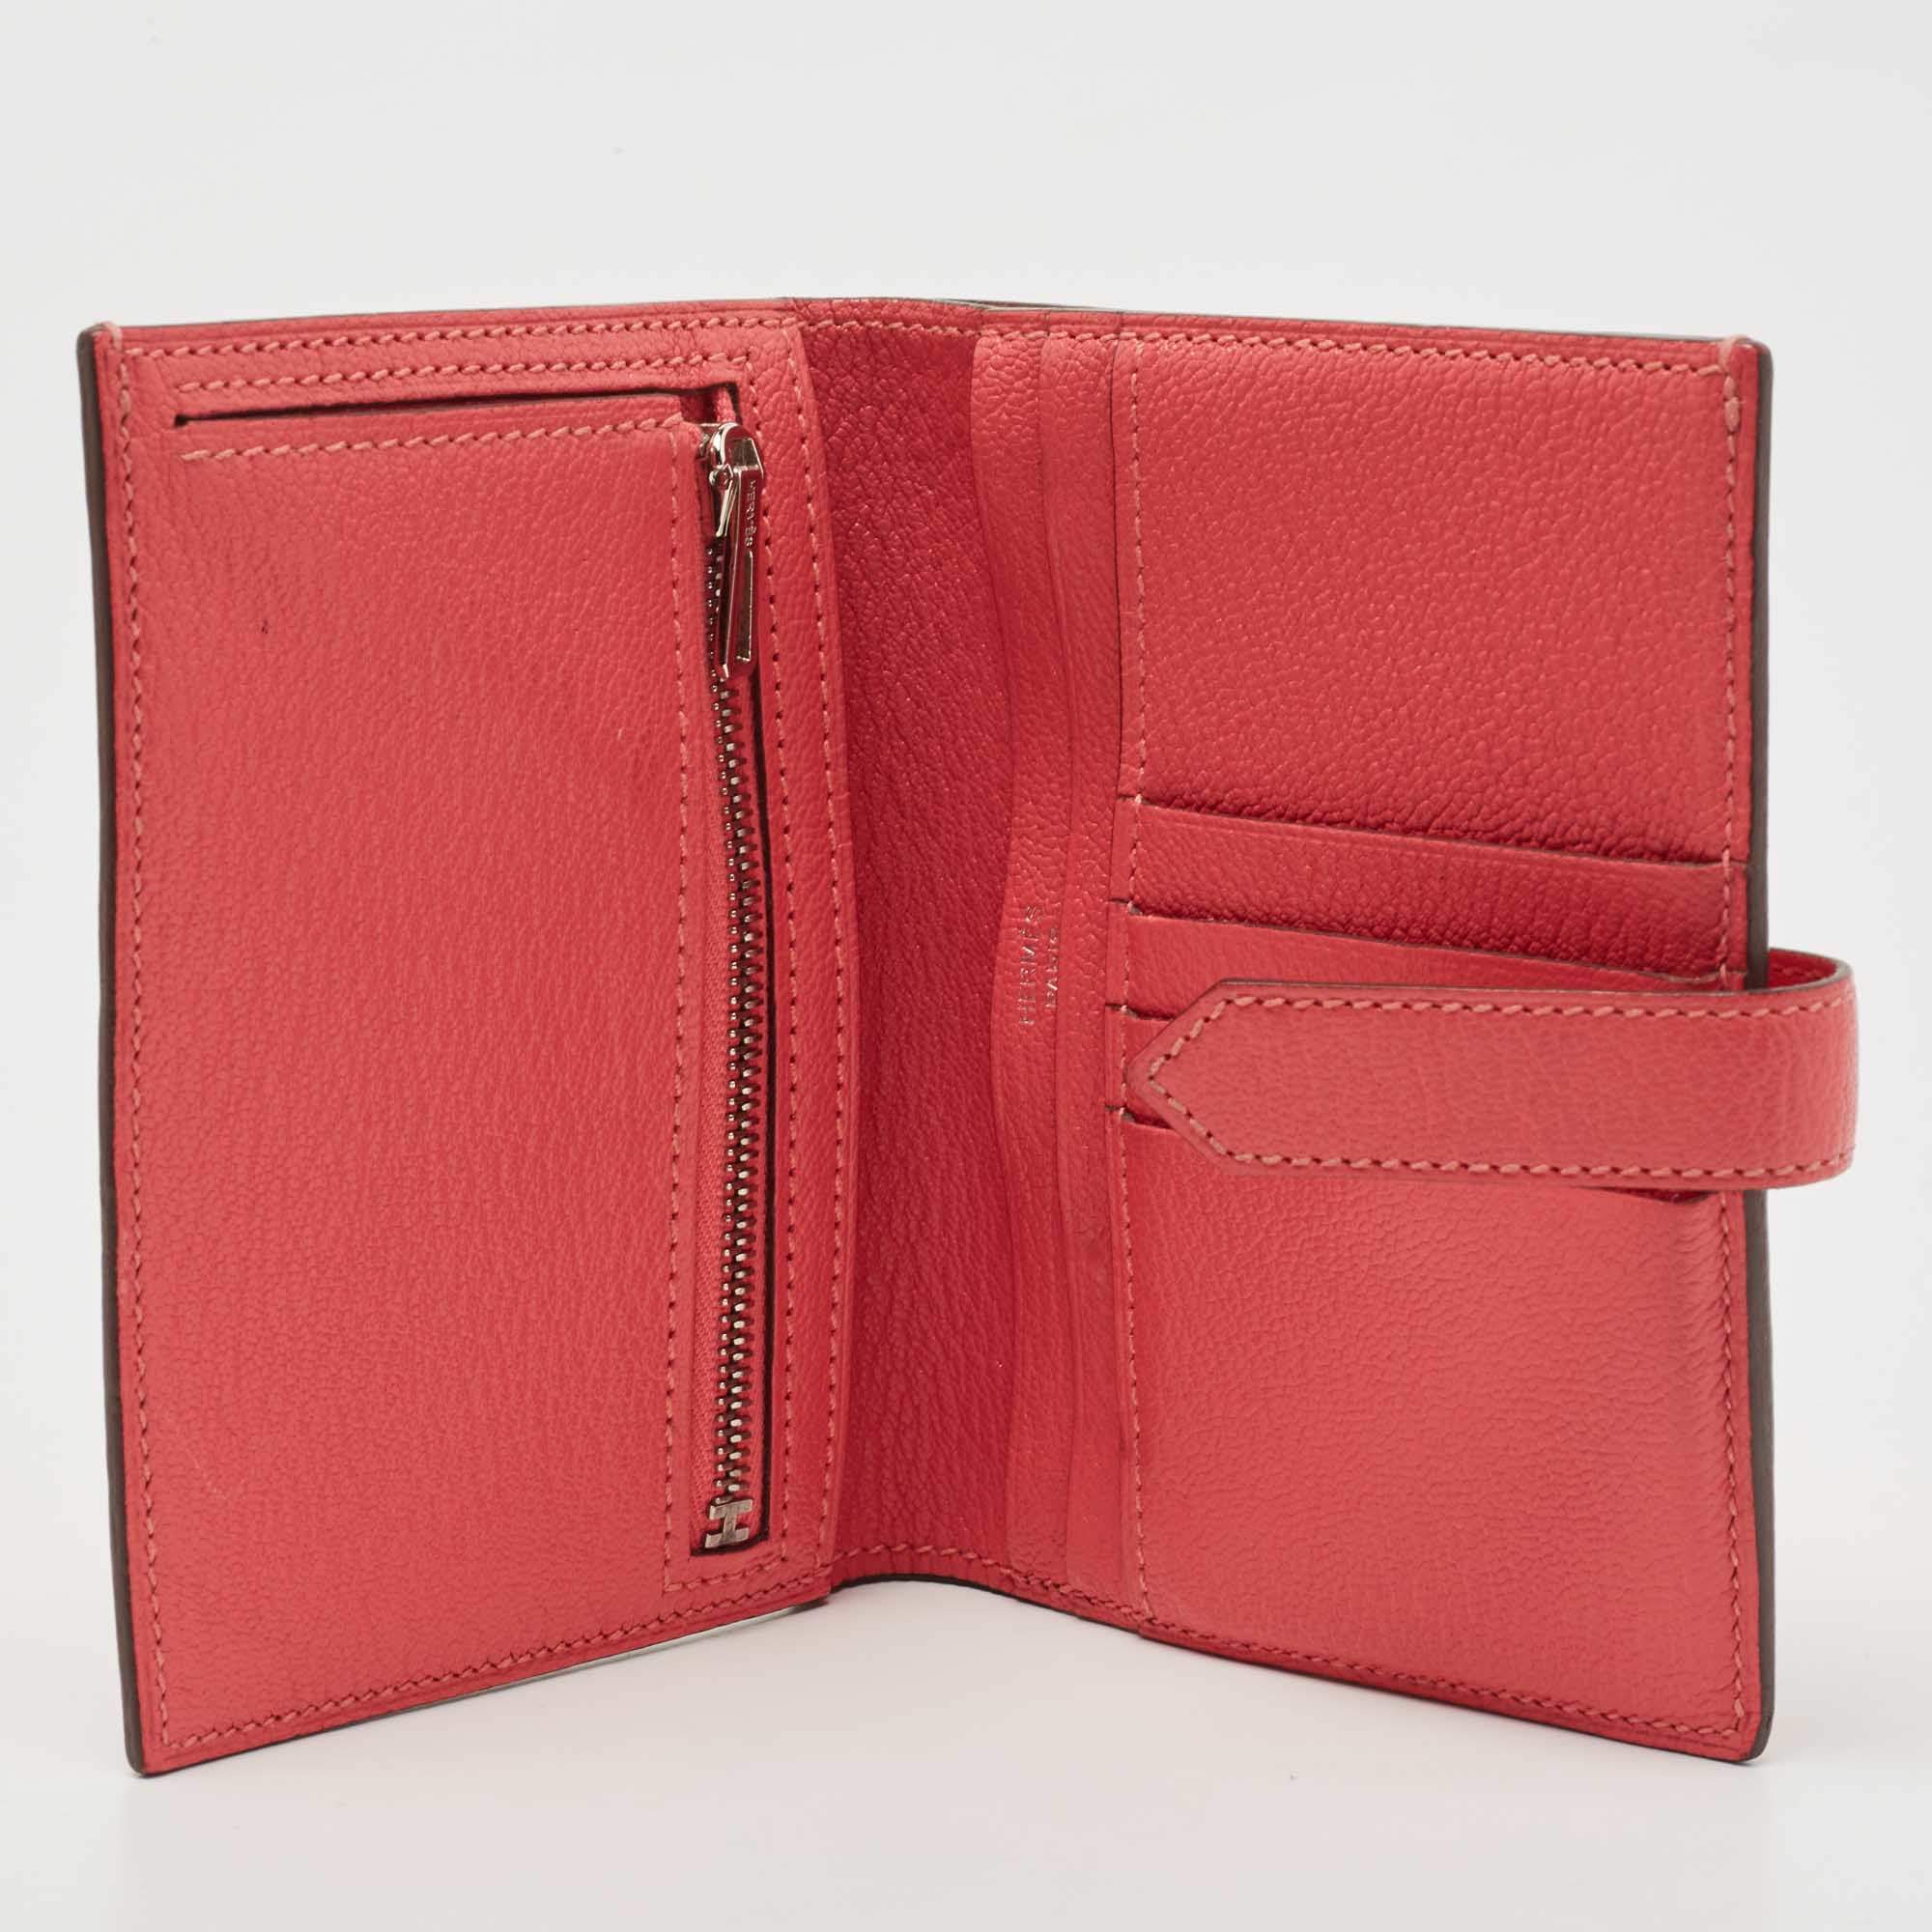 Hermes Bearn Wallet Rose Lipstick in Calfskin Leather with